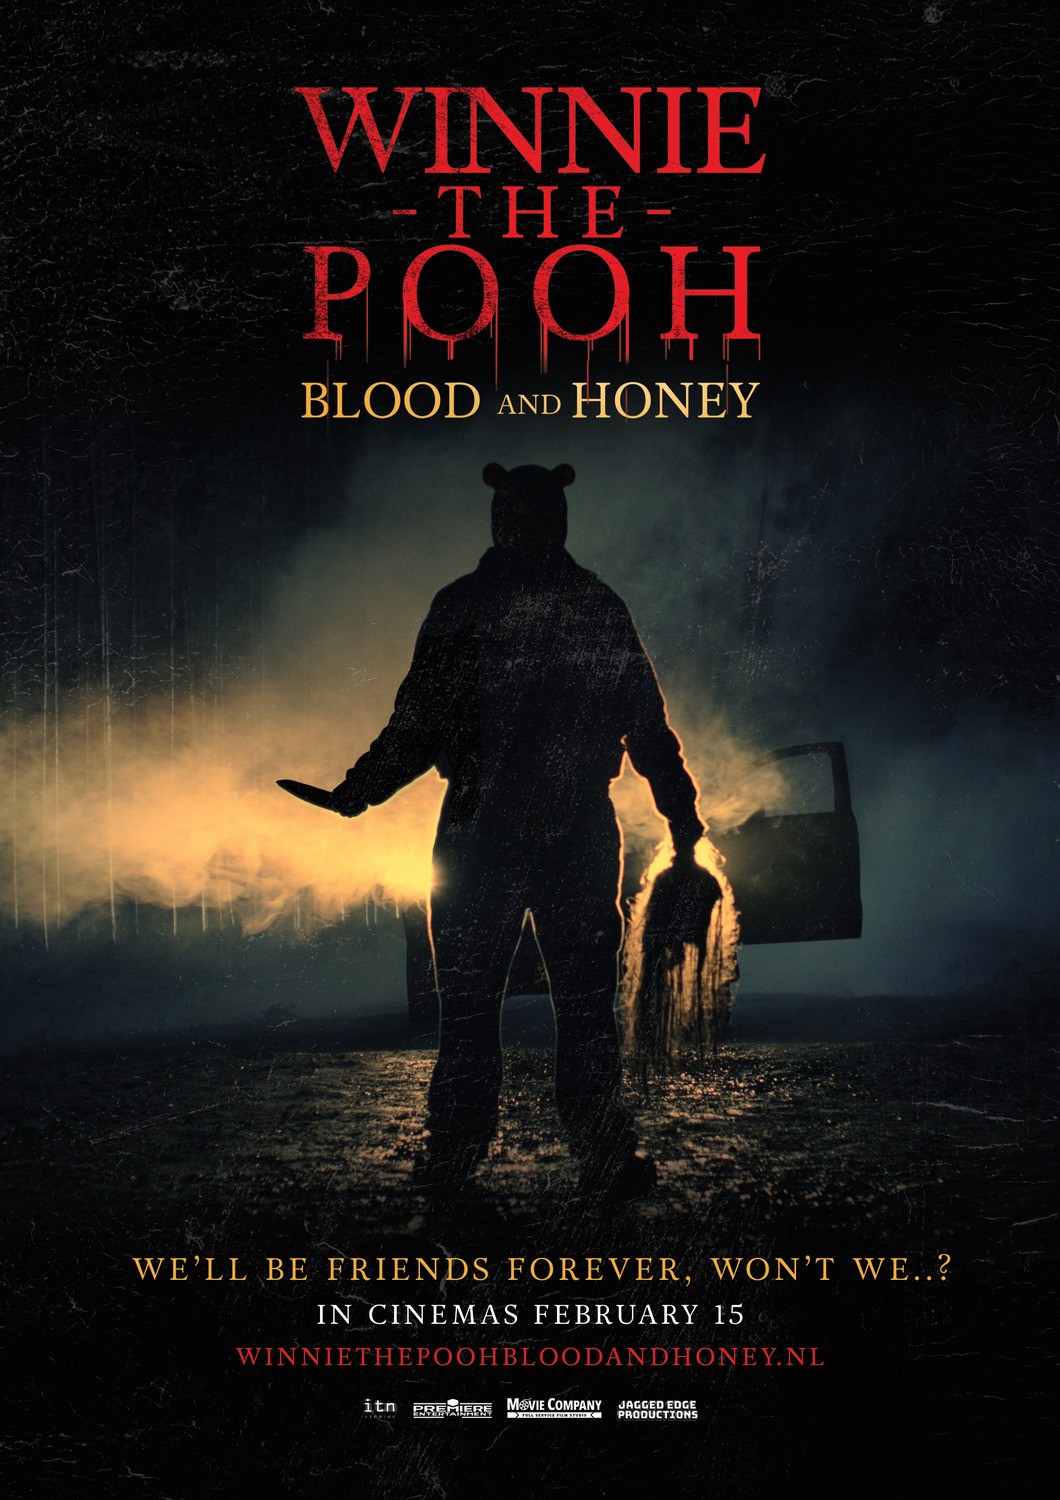 WINNIE THE POOH : BLOODY AND HONEY